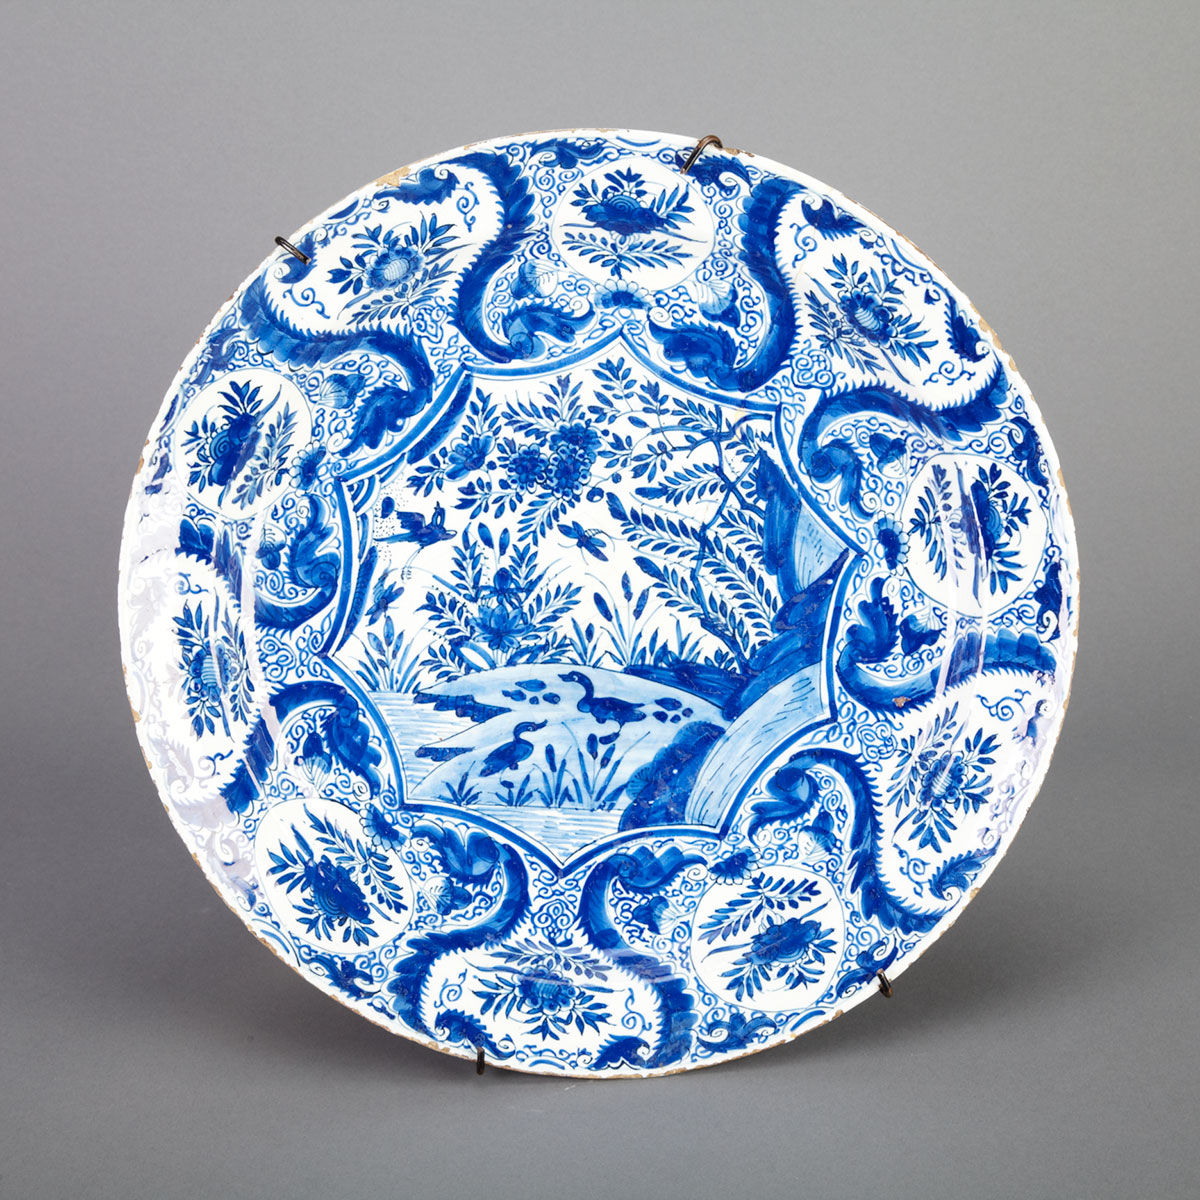 Delft Blue and White Charger 18th century